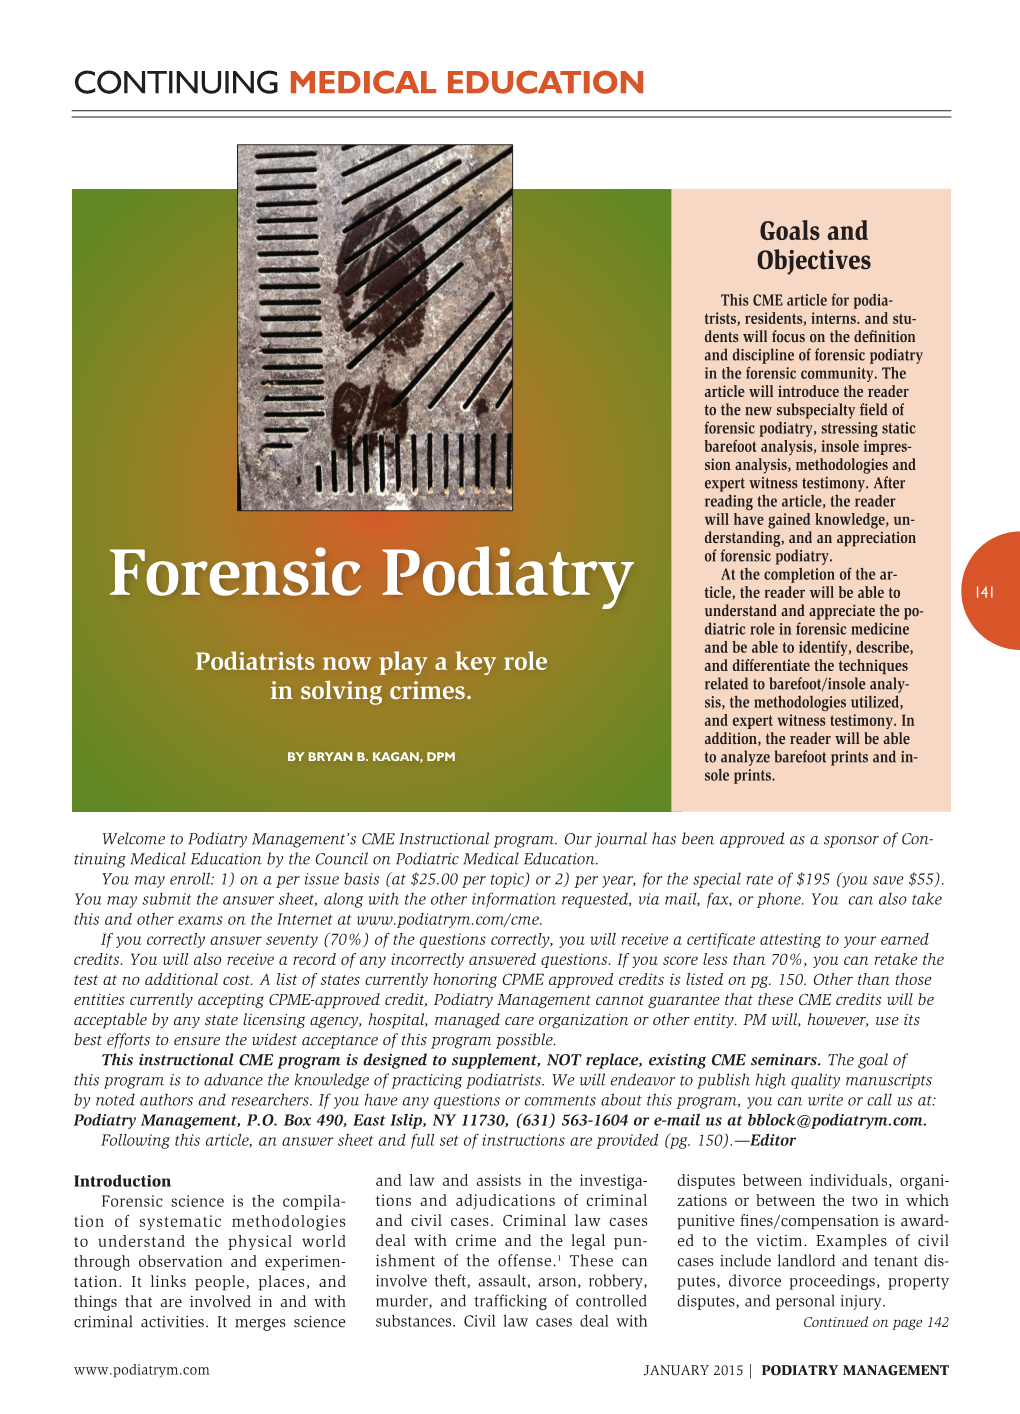 Forensic Podiatry in the Forensic Community